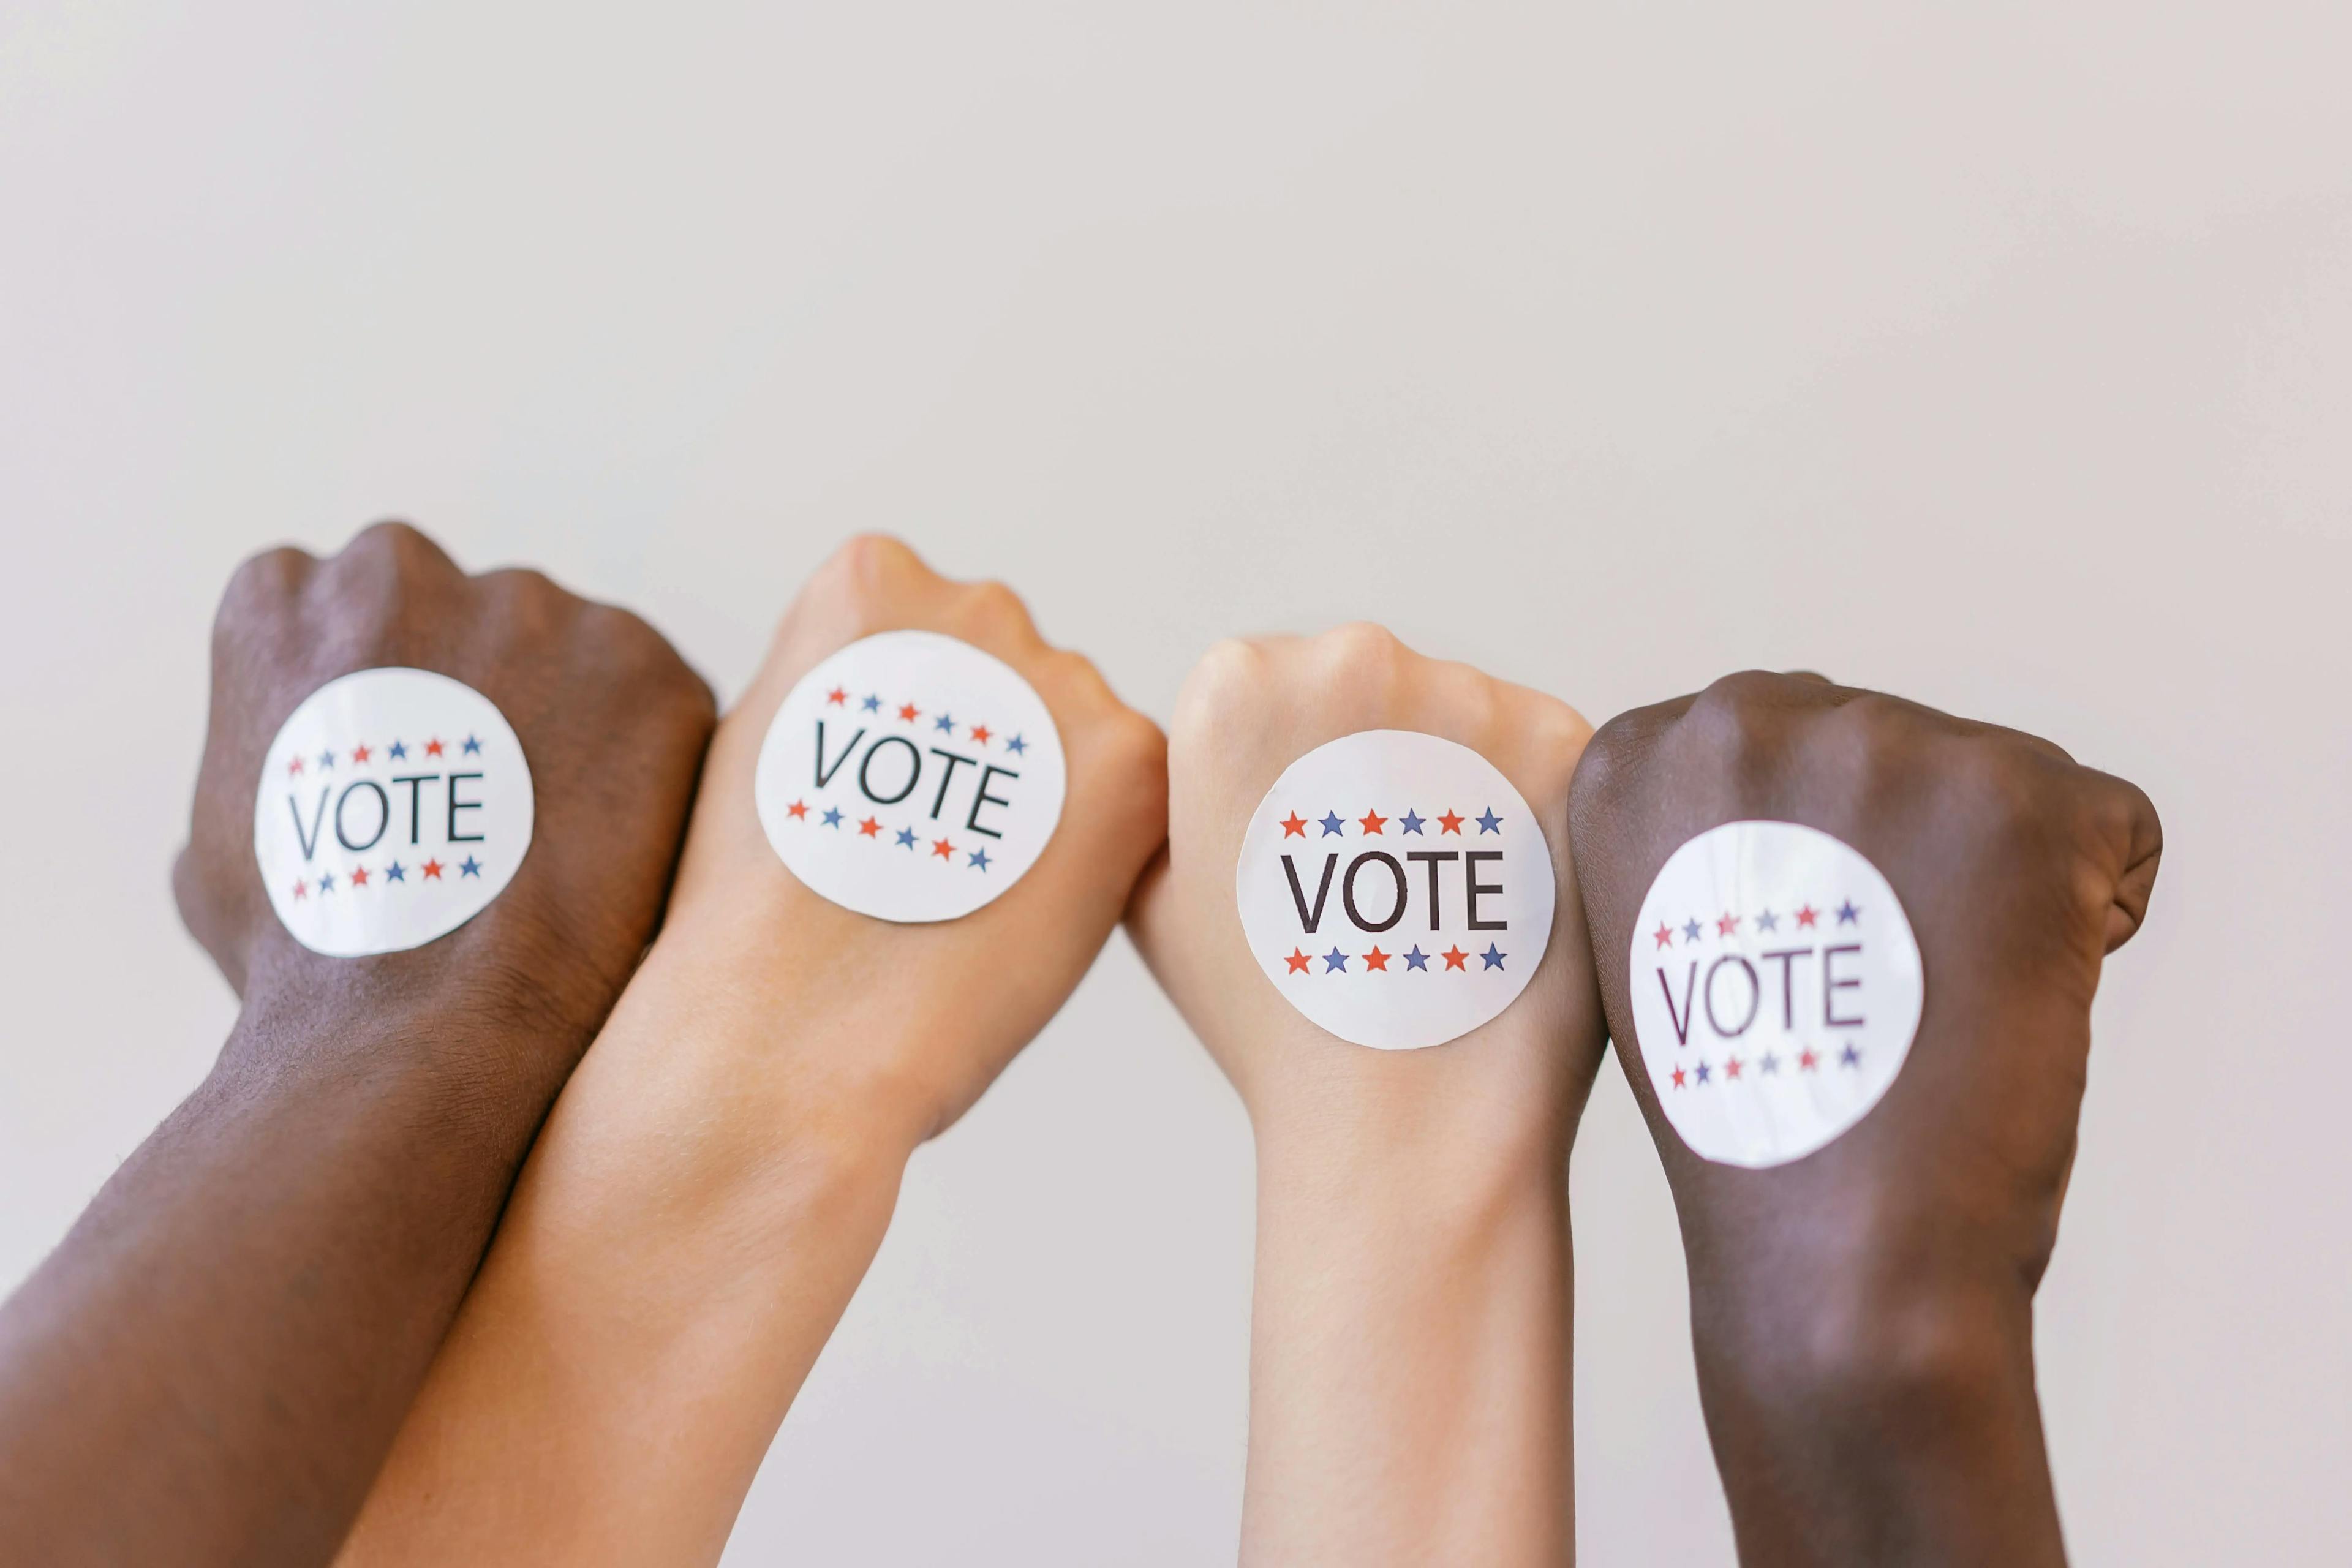 A close-up of closed fists with a sticker that says "vote".